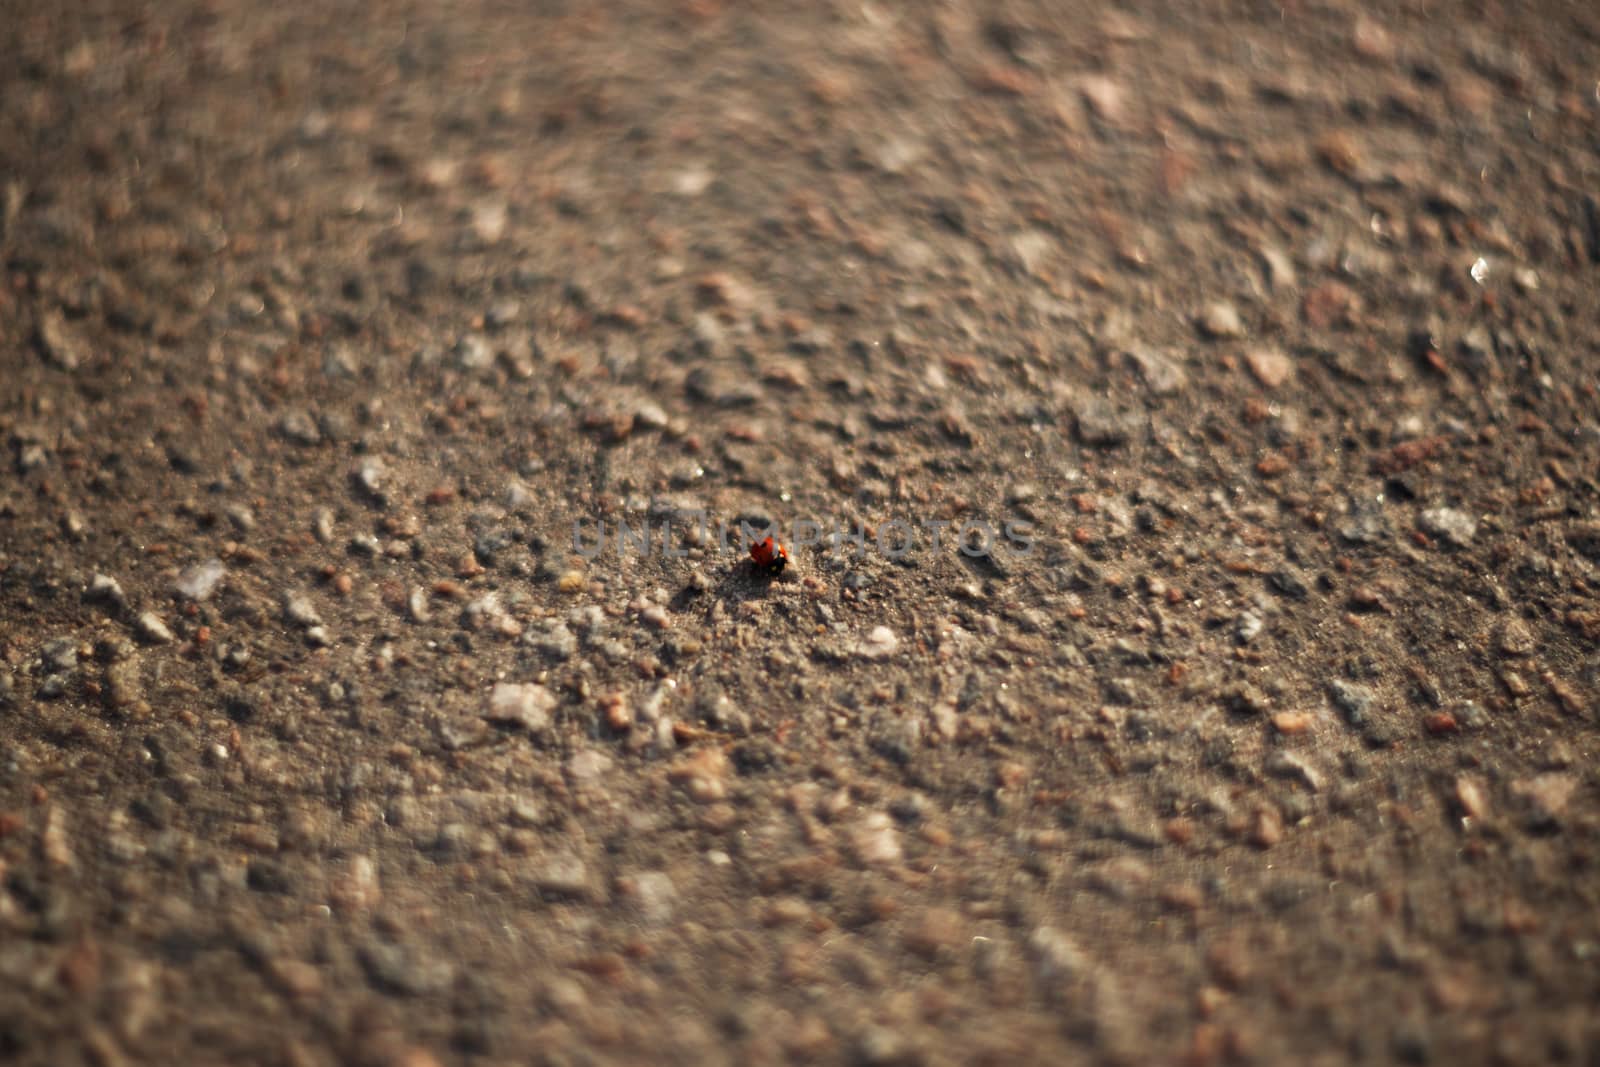 Ladybug on the pavement. A small insect on the roadway. by alexsdriver